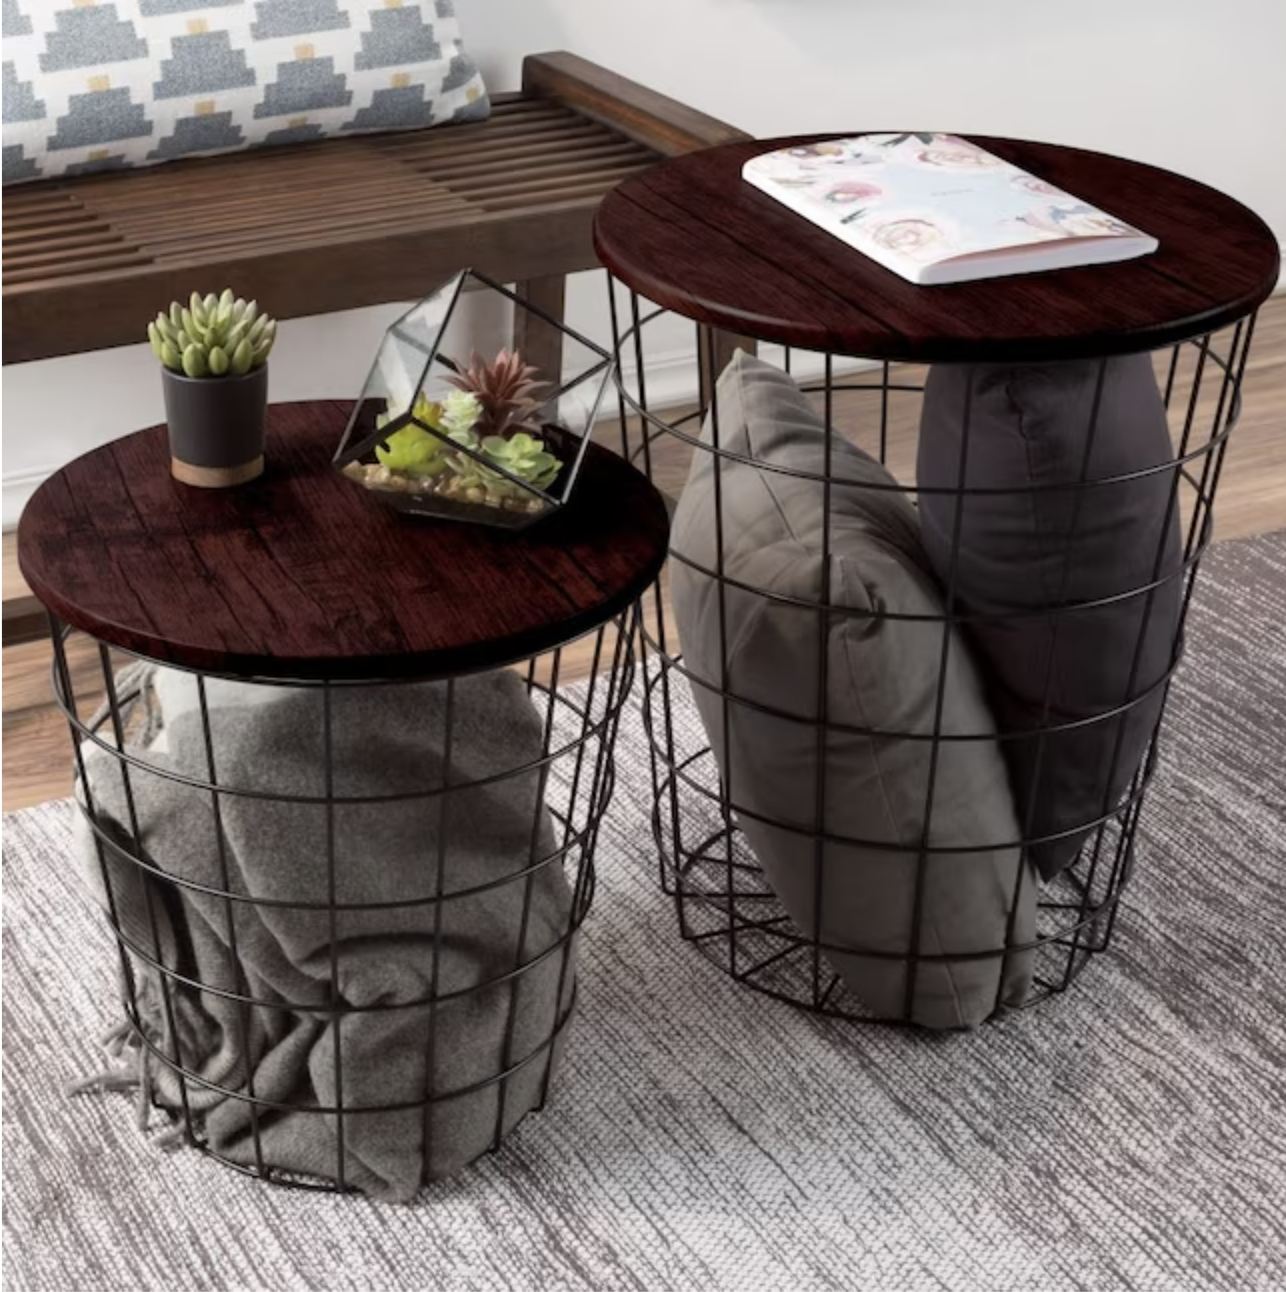 end tables with blankets and pillows inside